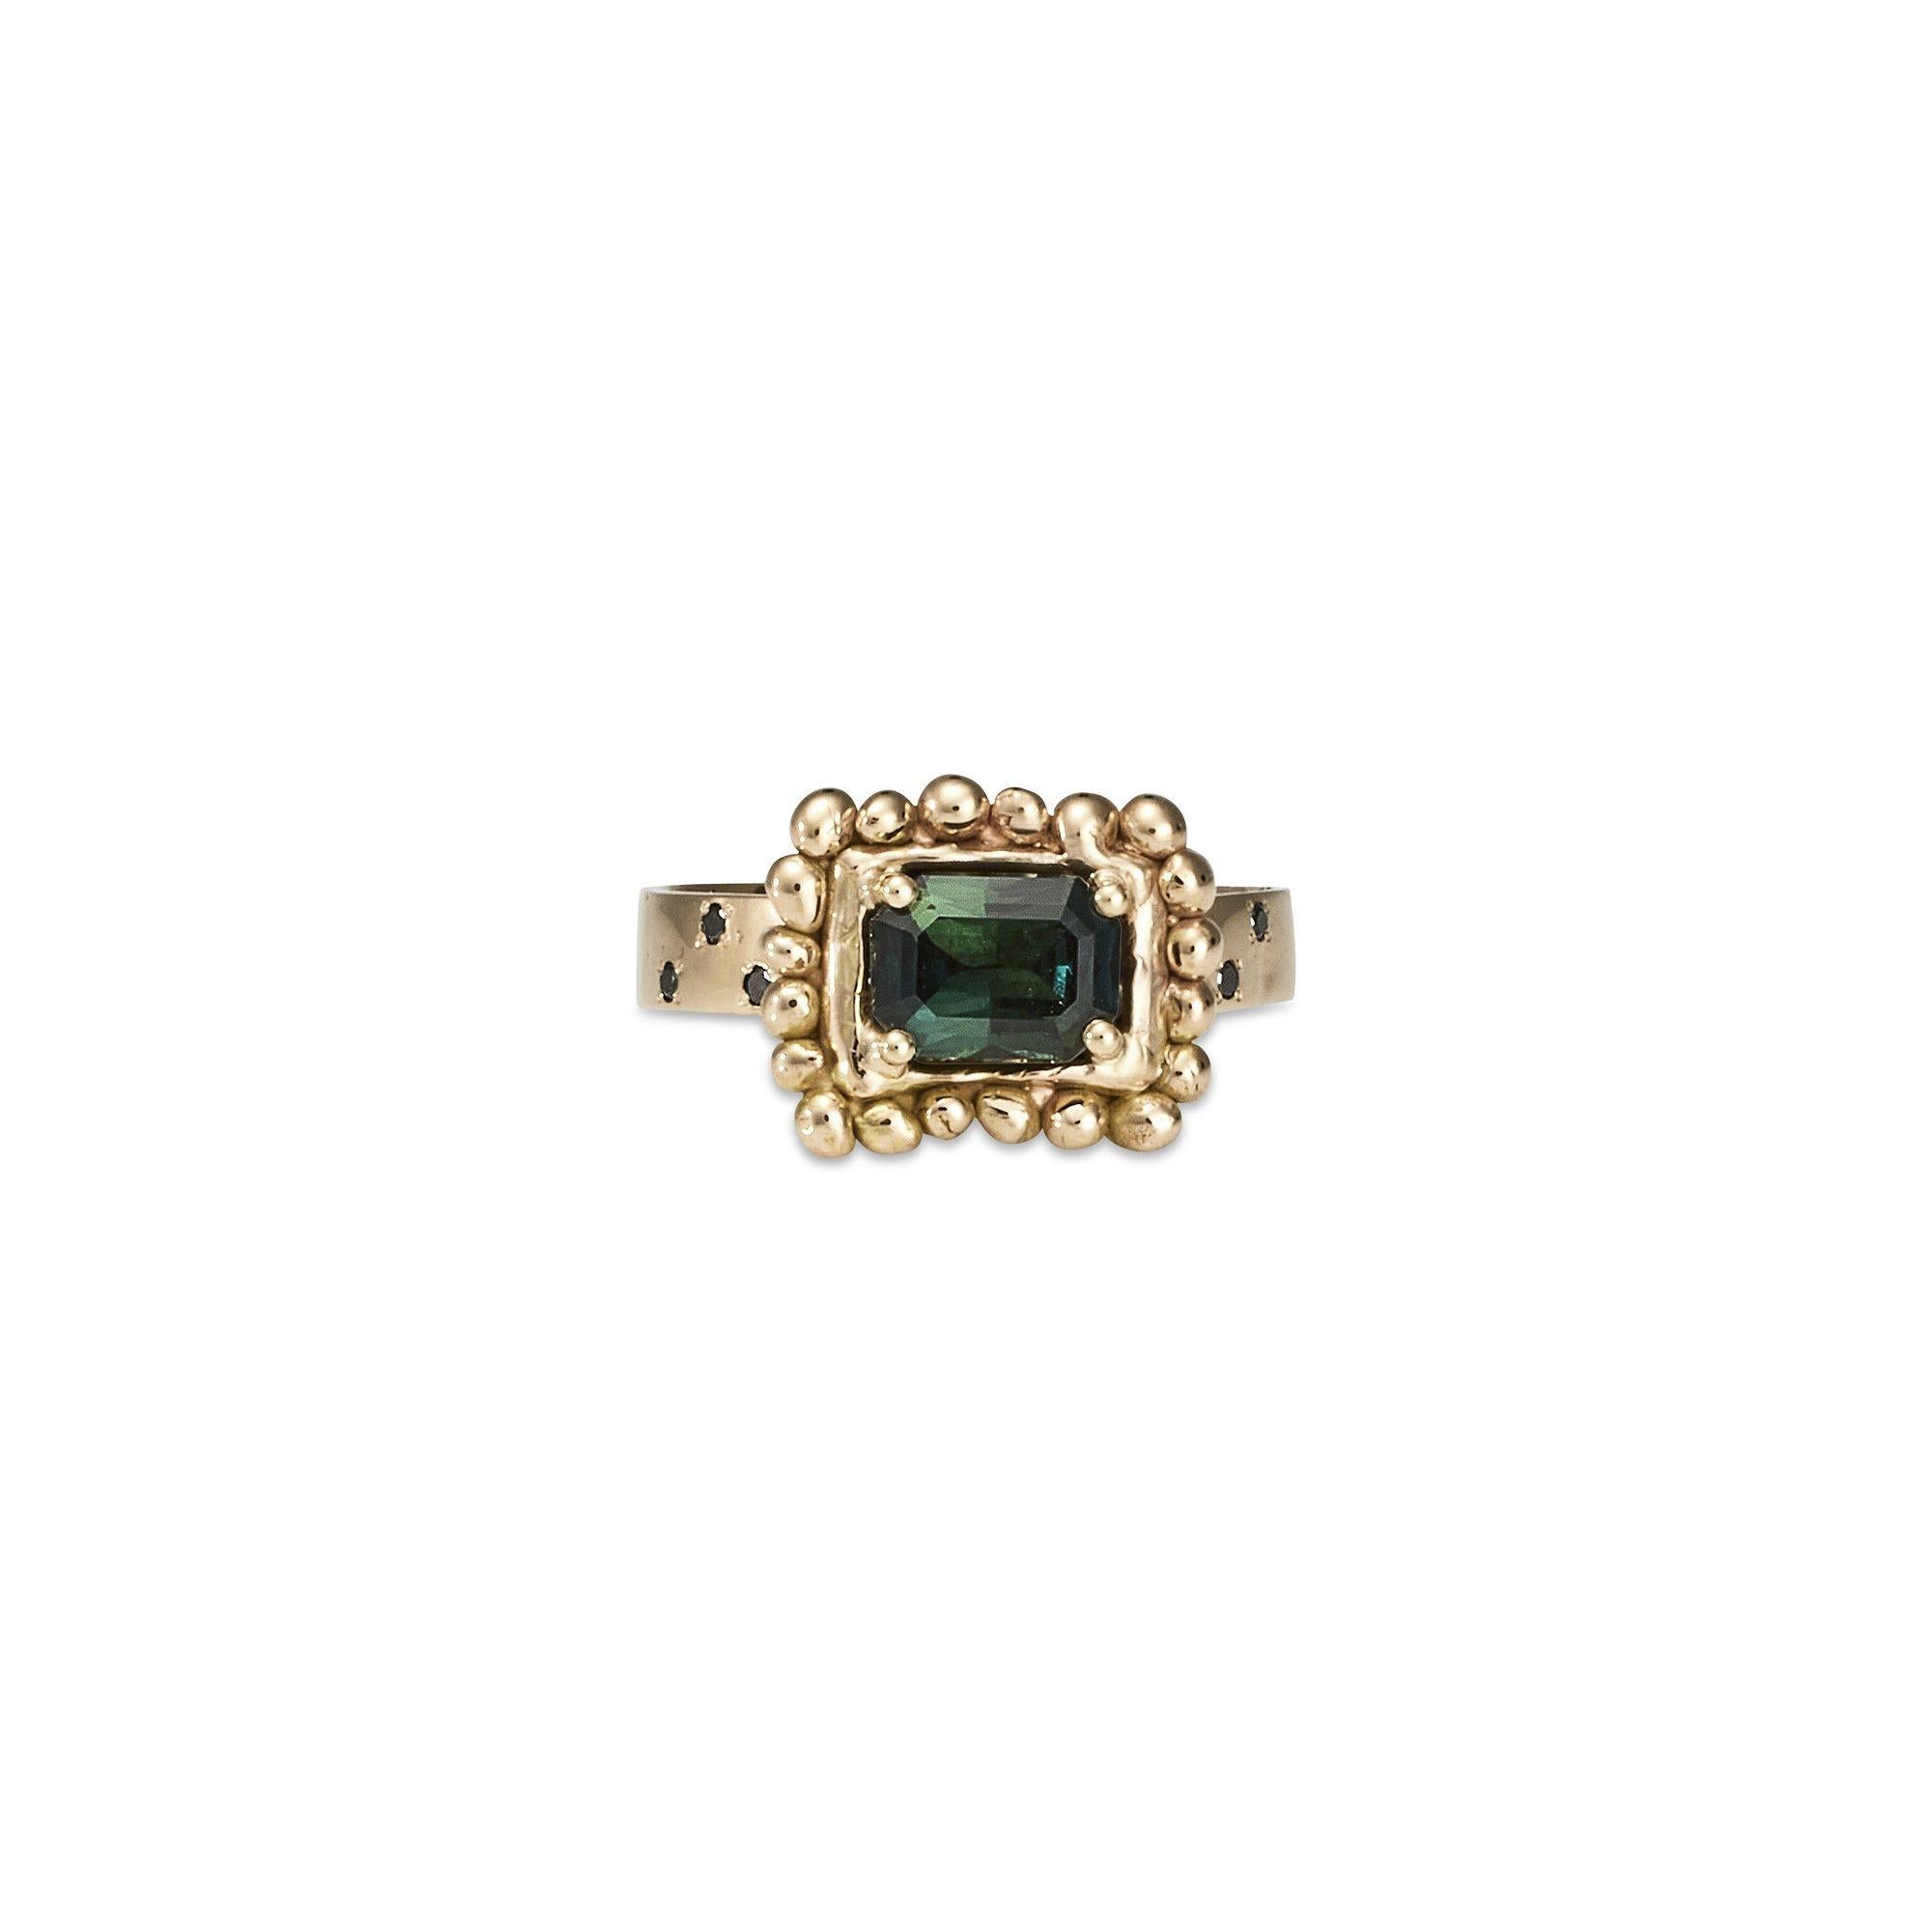 Hesper Ring, 18 Karat Yellow Gold with Australian Sapphire and Black Diamond
Handcrafted and individually cast in solid gold. Olivia carves each piece from wax, making these items unique, which we believe is what gives them their beauty. The Hesper